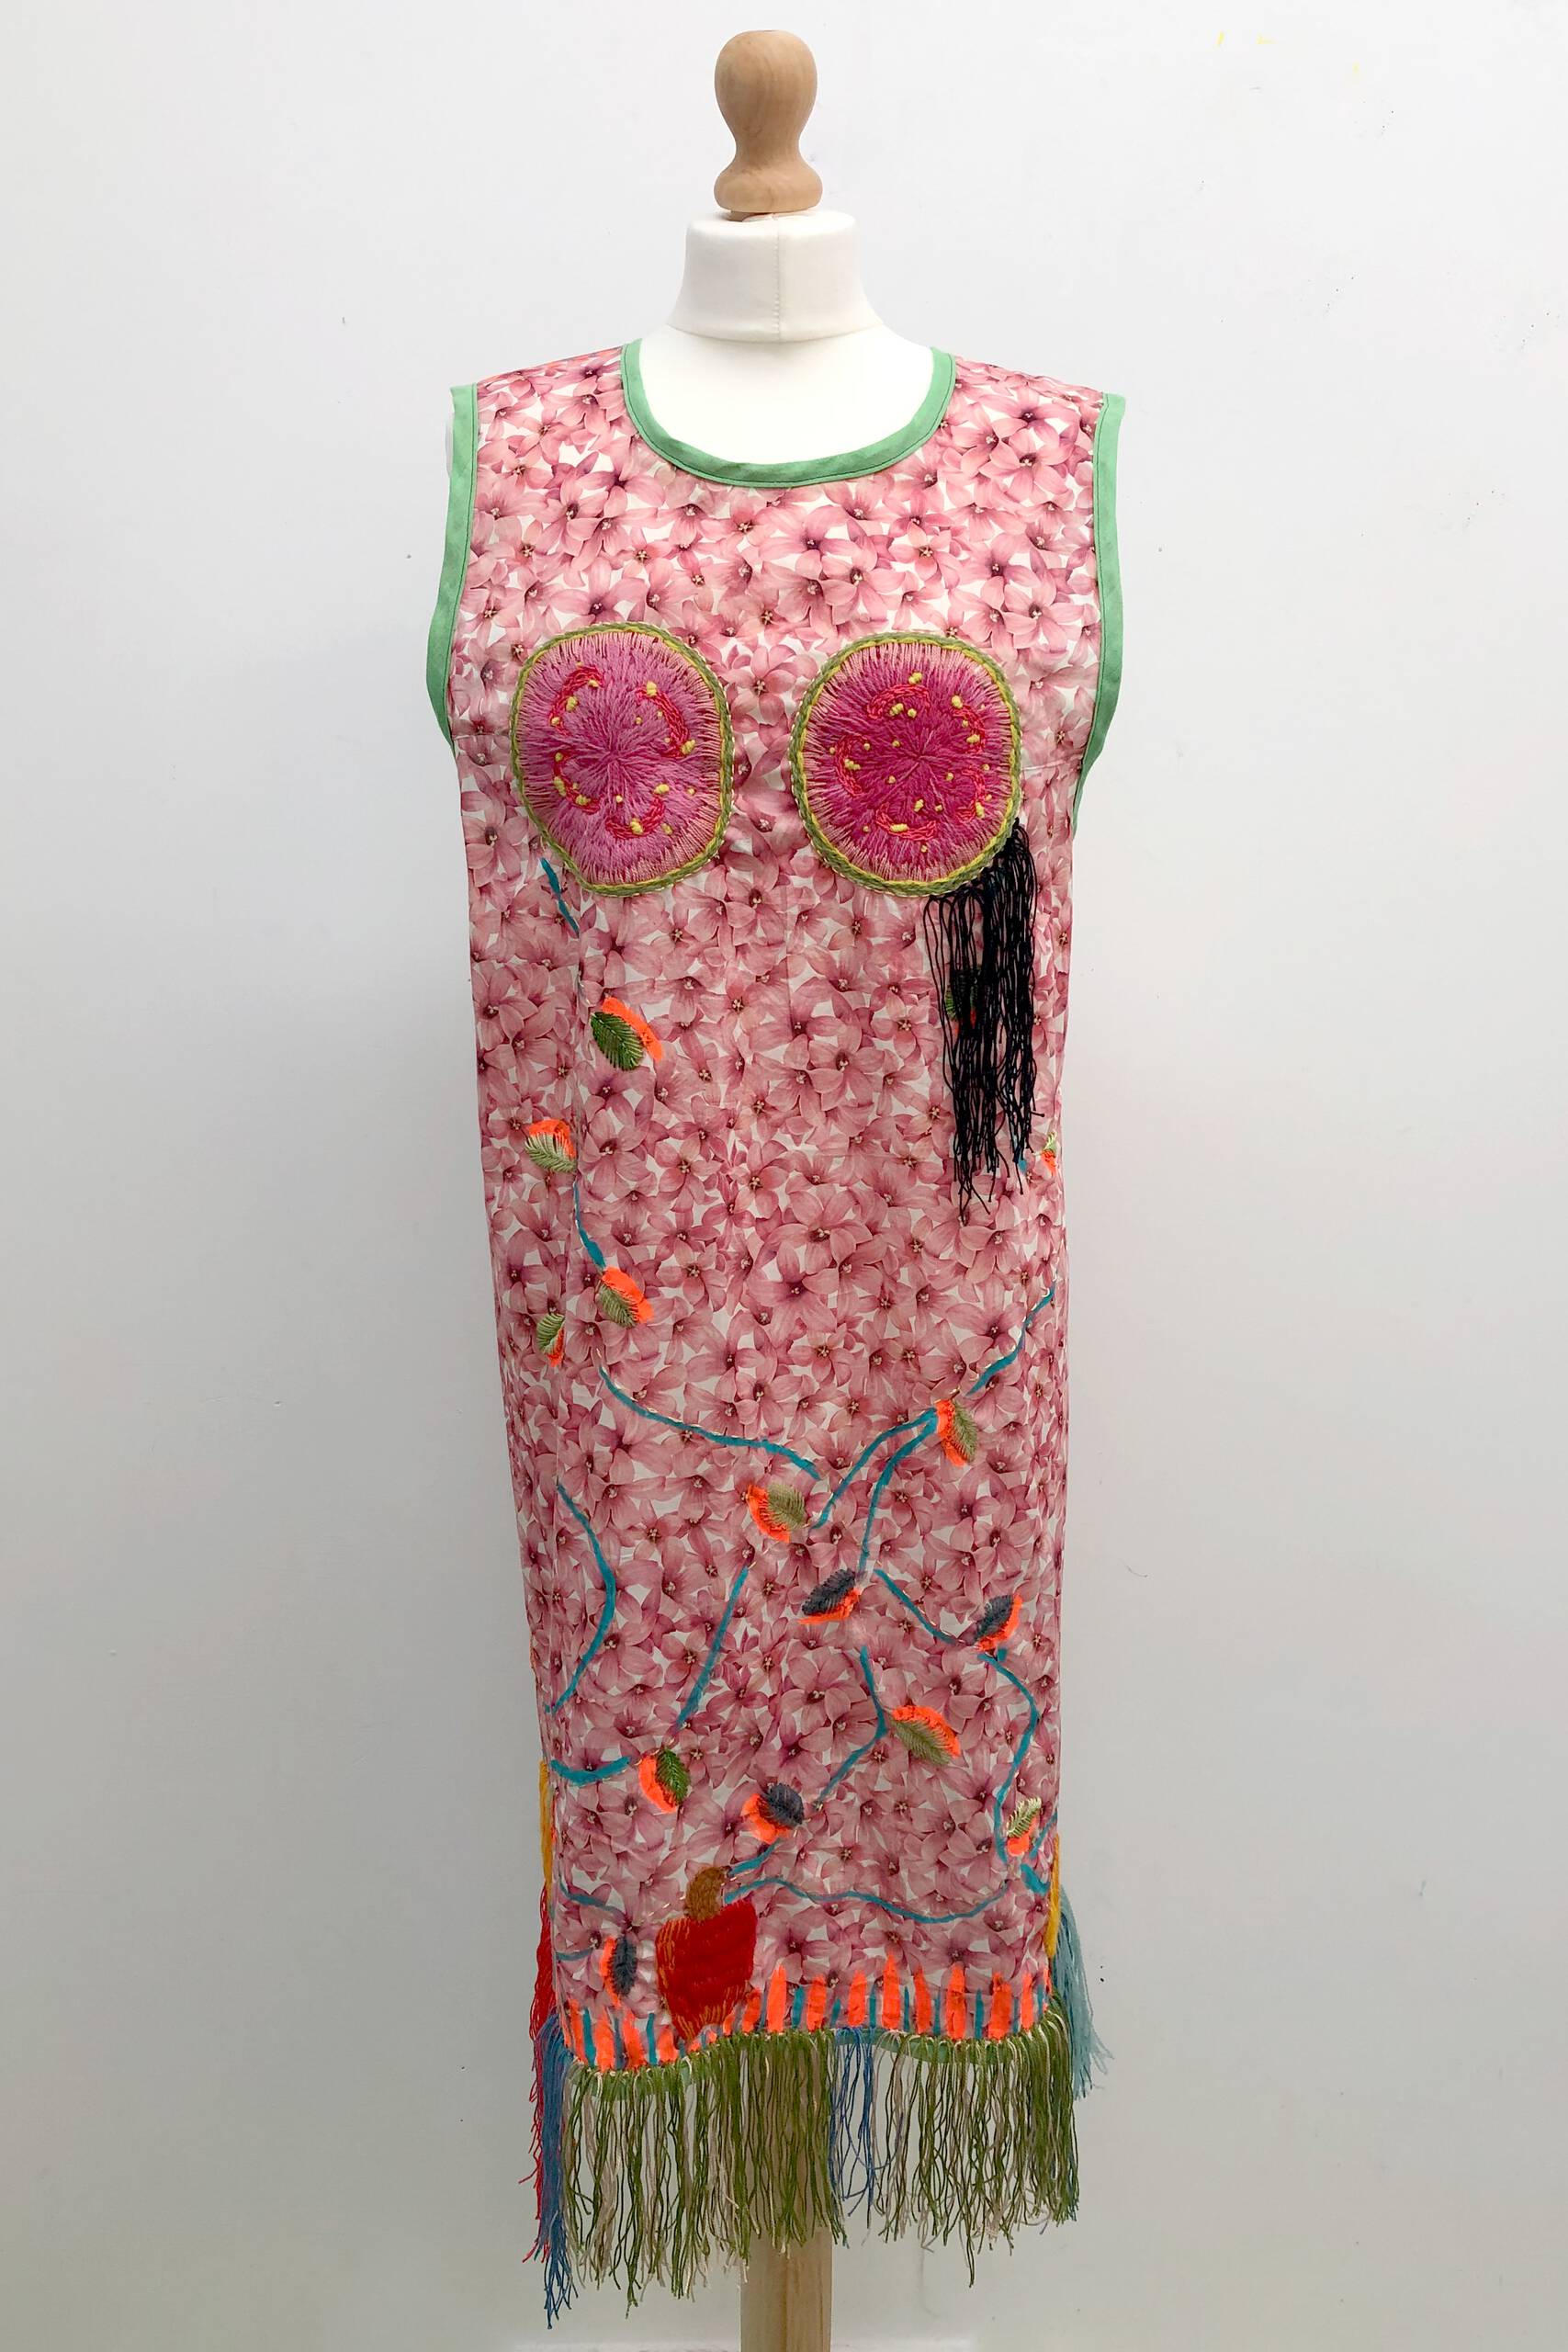 Fruits of Origin [guava] (collaboration with Goia Mujalli), Fabric, acrylic paint, hand-embroidery on hand-sewn garment, 2019